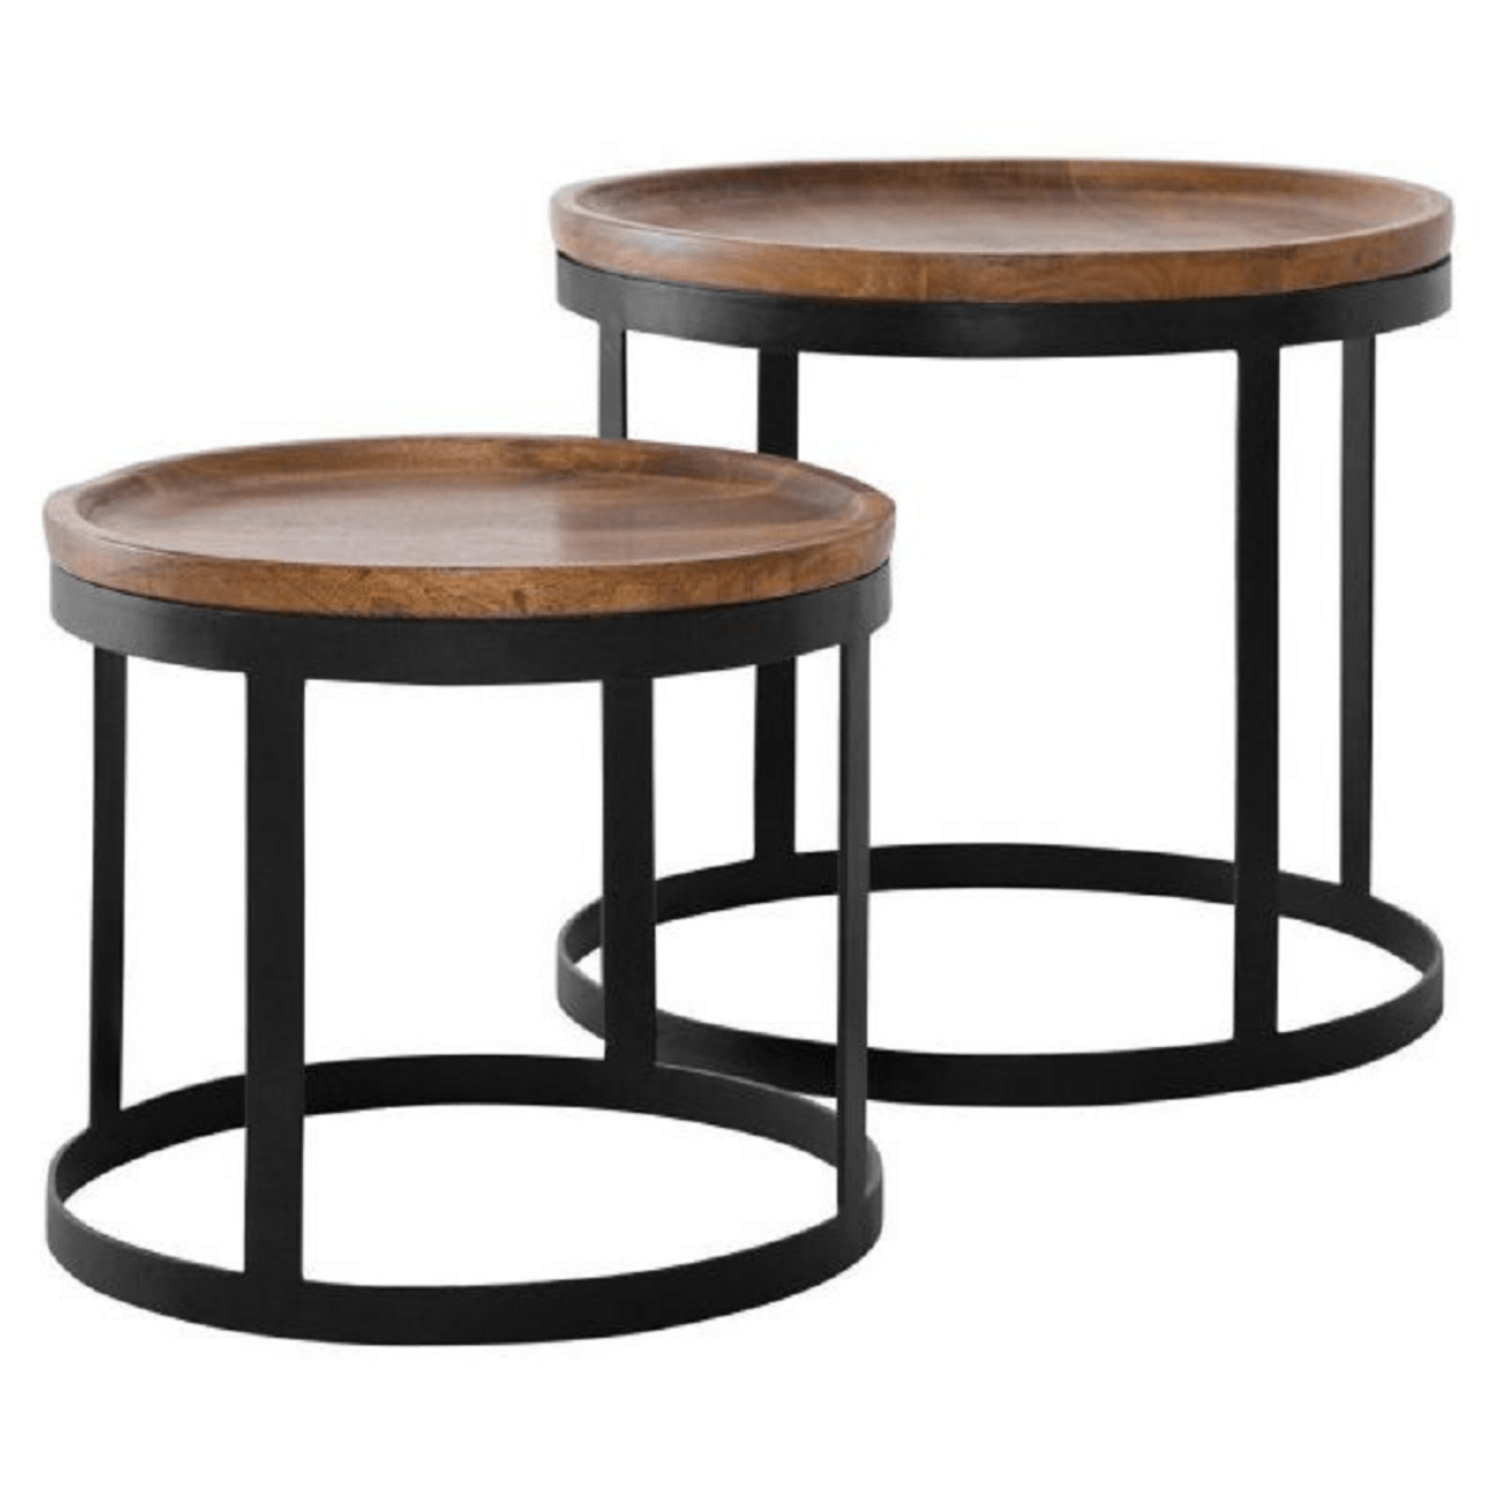 Nested industrial coffee tables online india